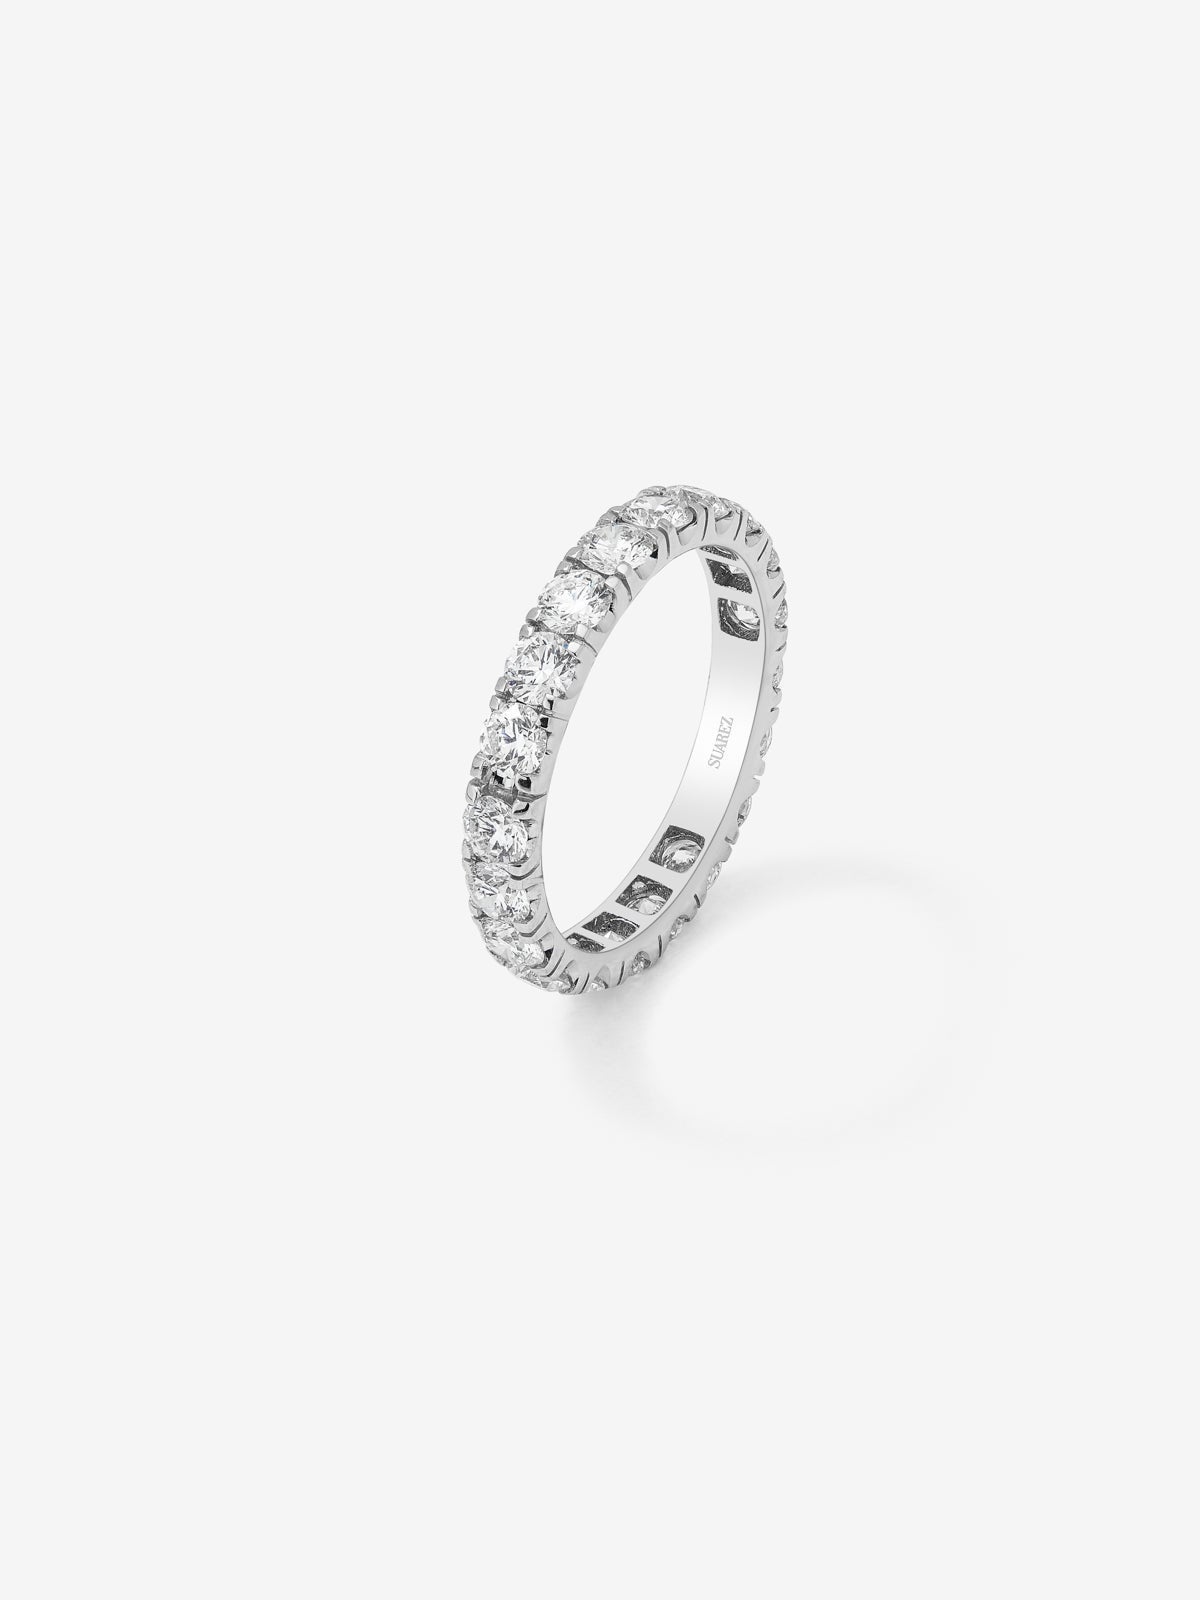 Entire 18K white gold ring with 24 brilliant-cut diamonds with a total of 1.06 cts